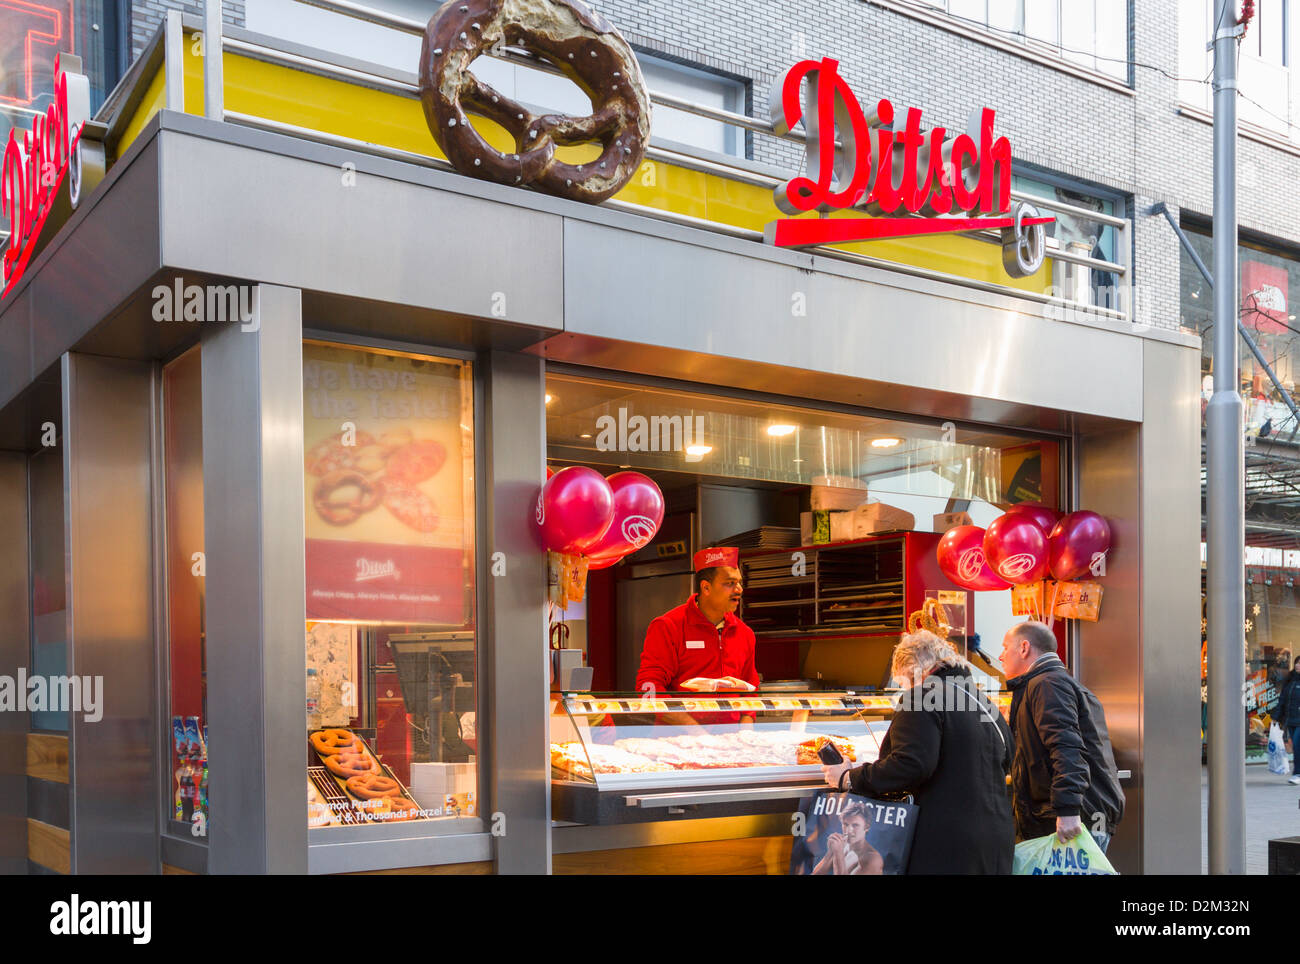 Couple buying pizza at Ditsch stall, Liverpool Stock Photo